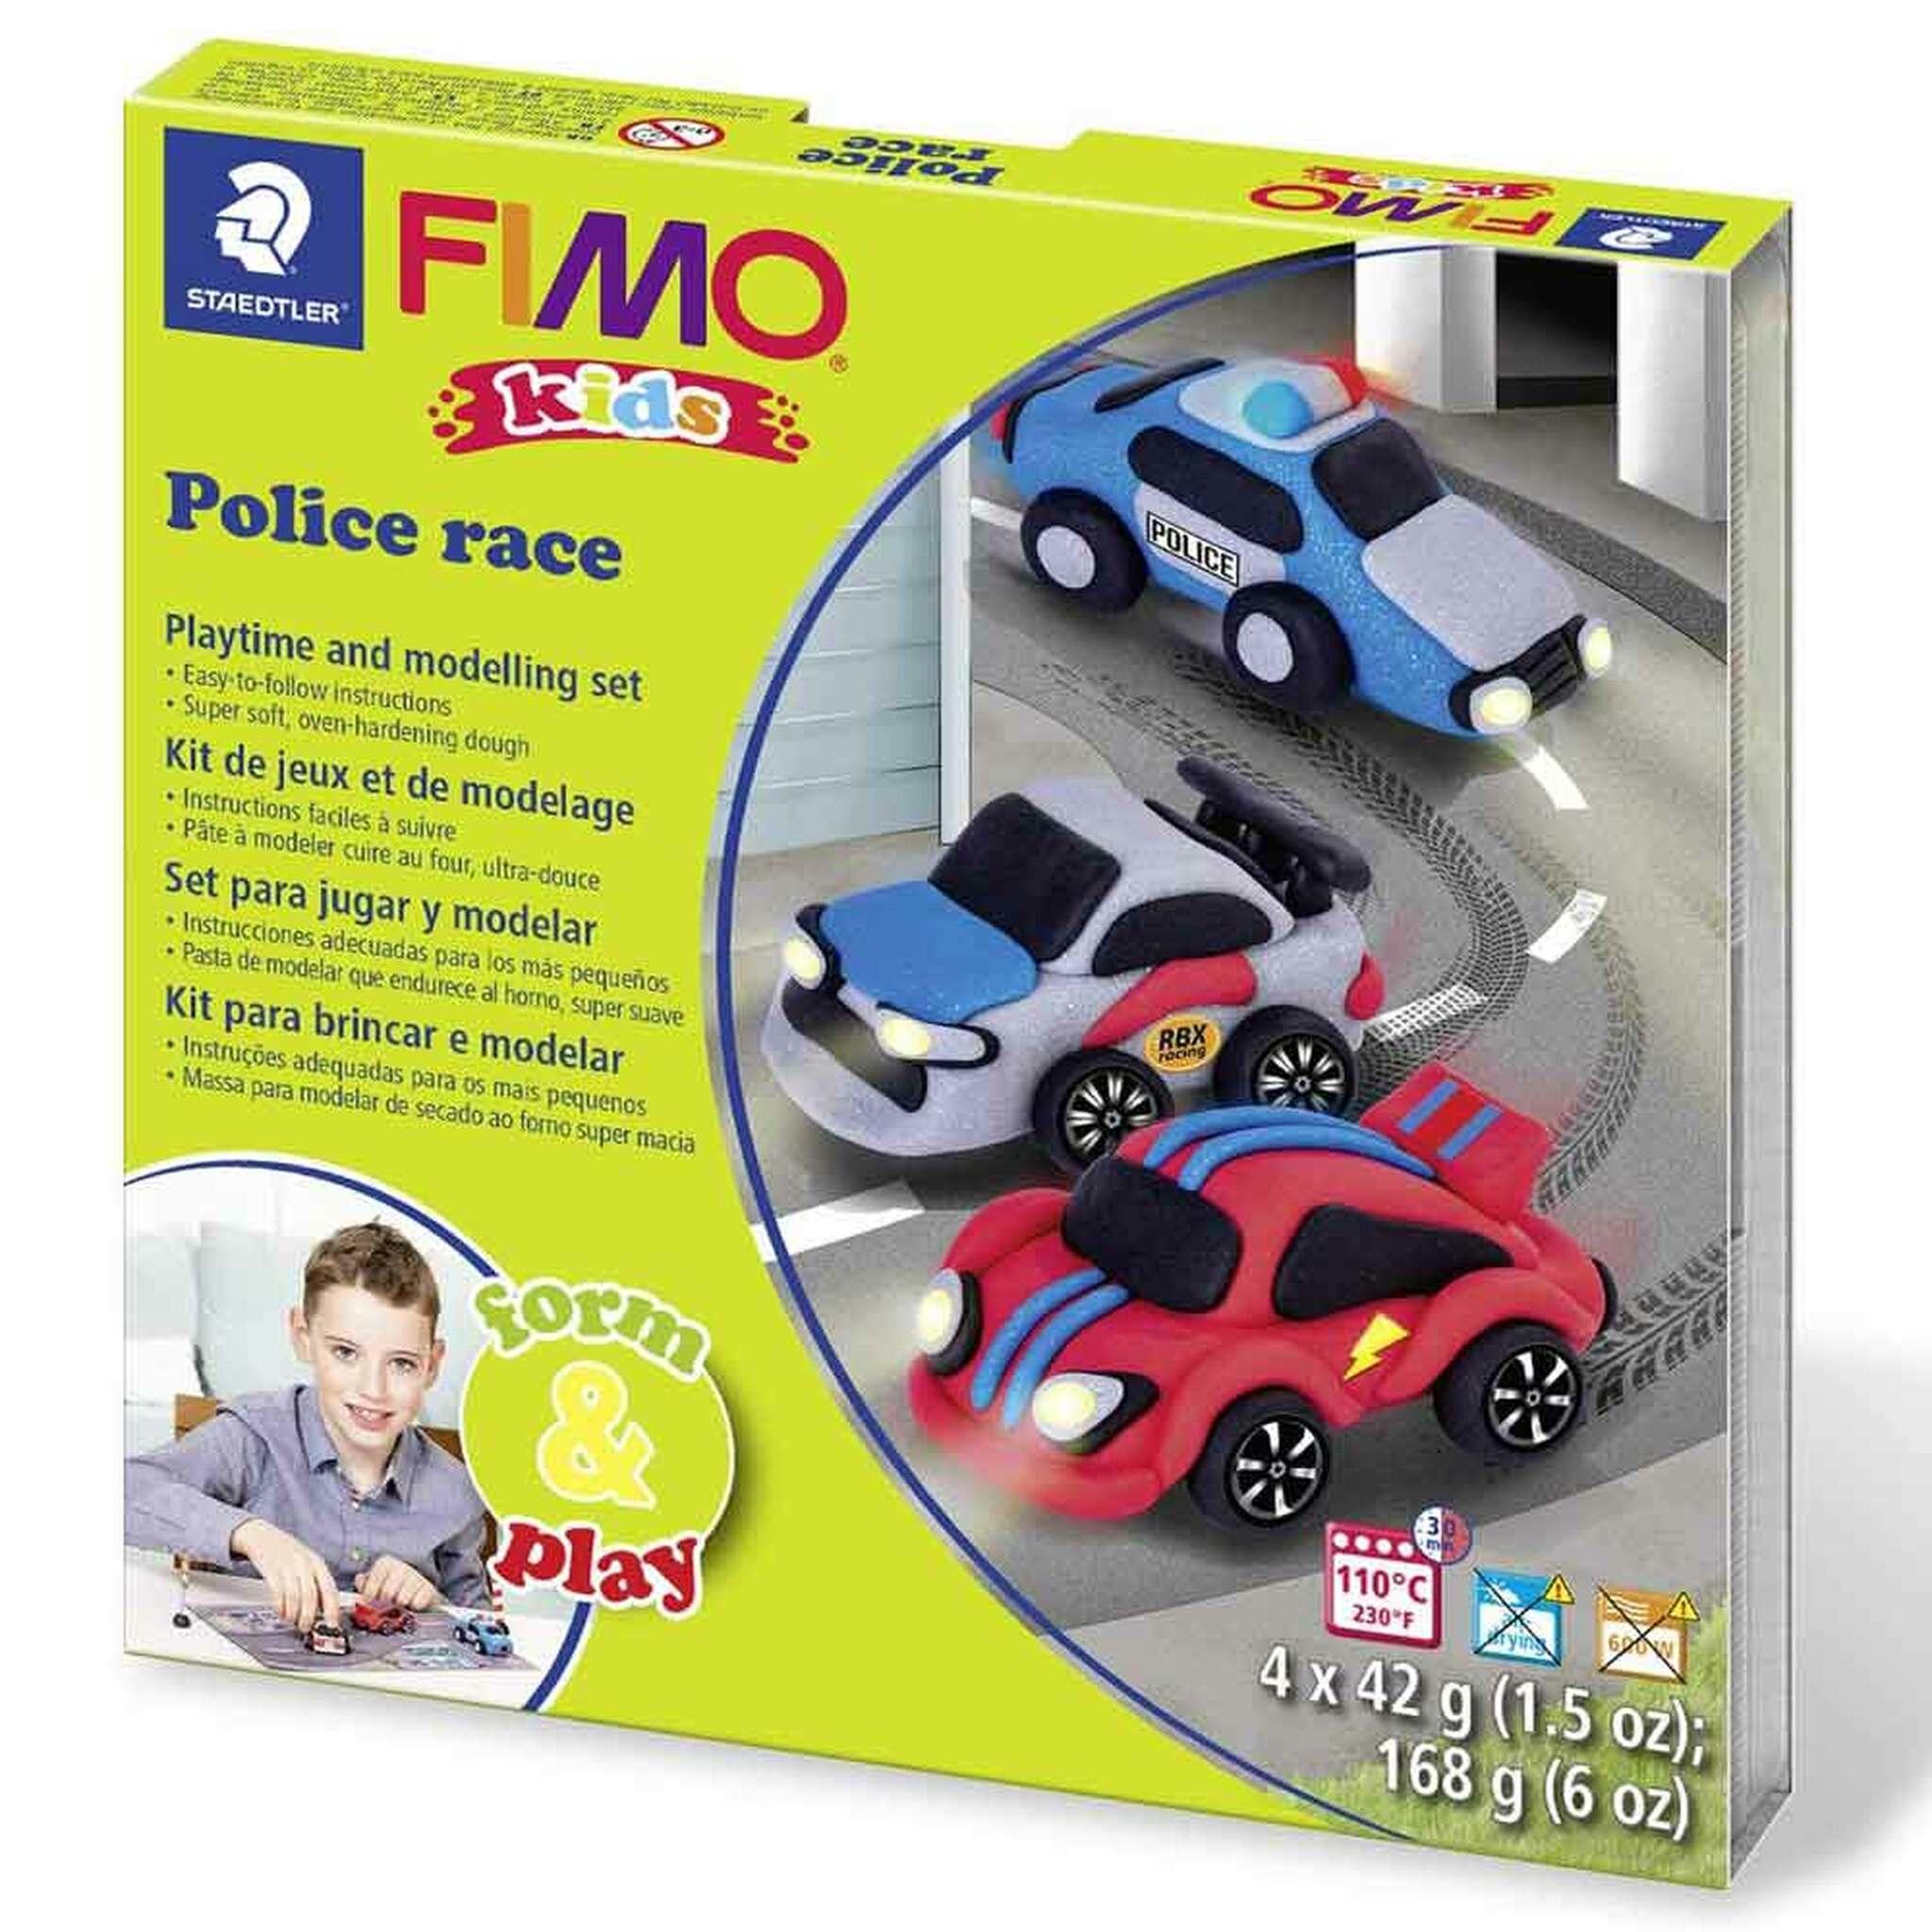 Box containing FIMO modelling clay police car set.